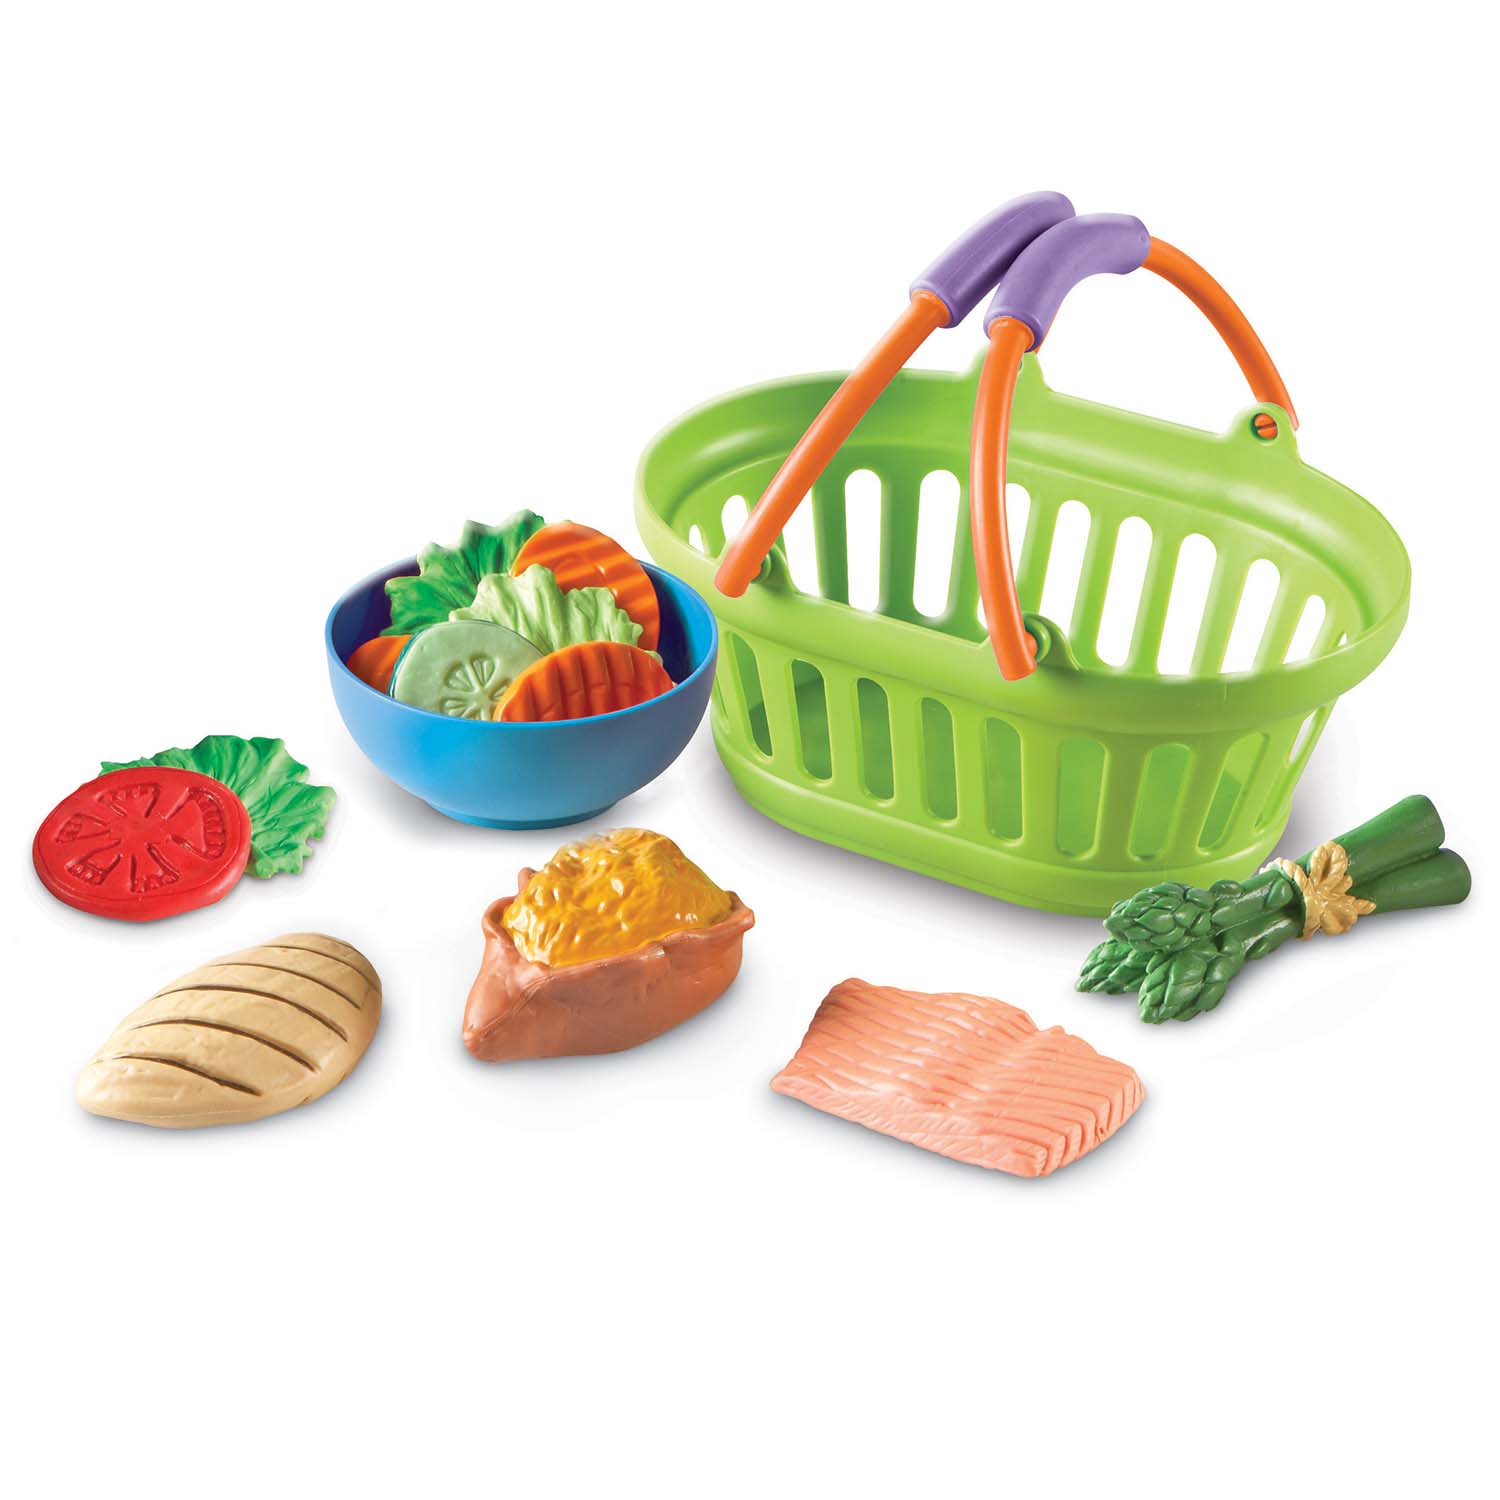 Sprouts™ Healthy Eating - 3 Meal Set